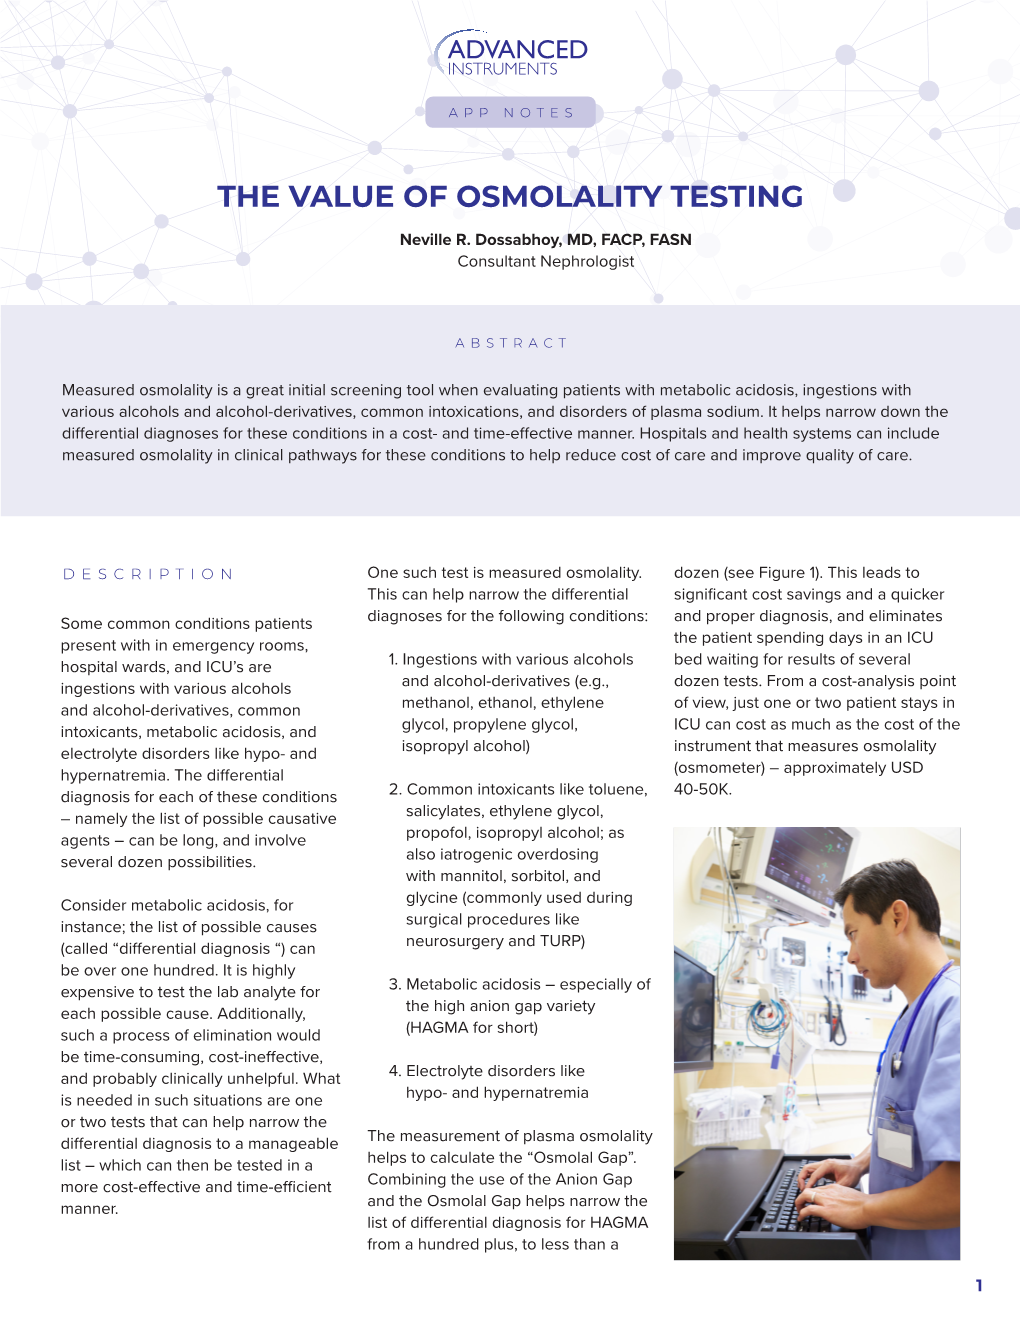 The Value of Osmolality Testing